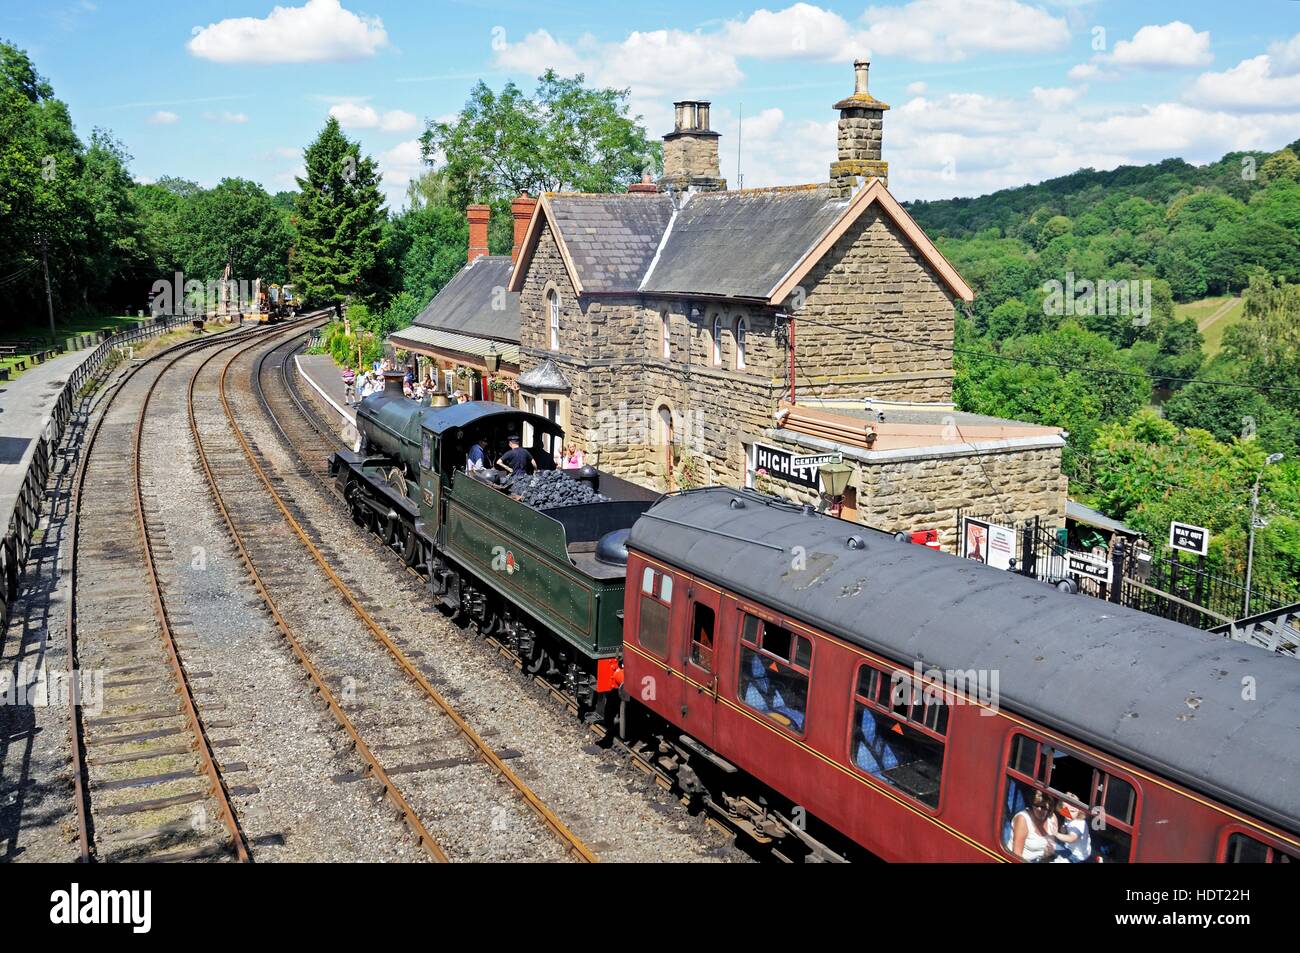 Steam Locomotive approaching the railway station, Highley, Worcestershire, England, UK, Western Europe. Stock Photo